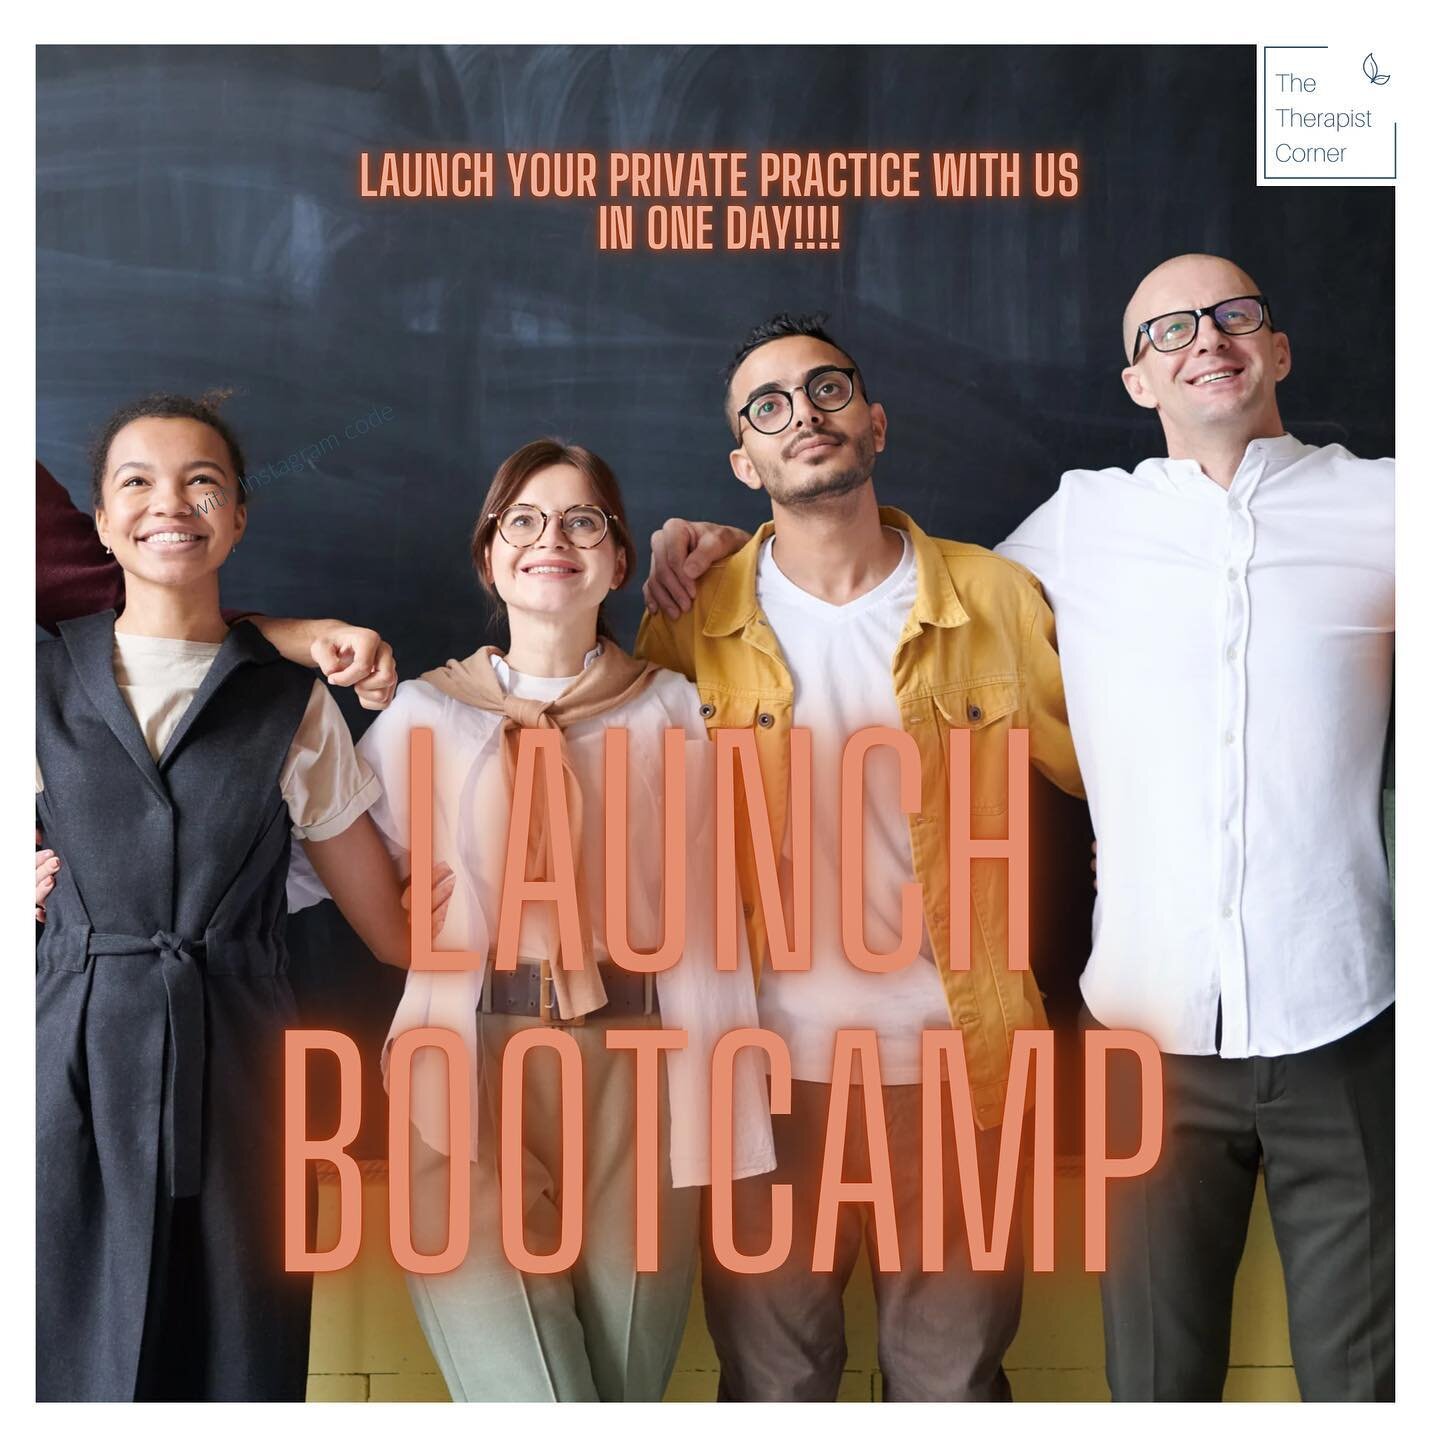 Join Us August 12th &amp; You&rsquo;ll Be Ready To Open Your Private Practice the Next Day!

This is a hands-on, get-it-done business Bootcamp for therapists ready to start a private practice. If you value being efficient, business savvy, and profess